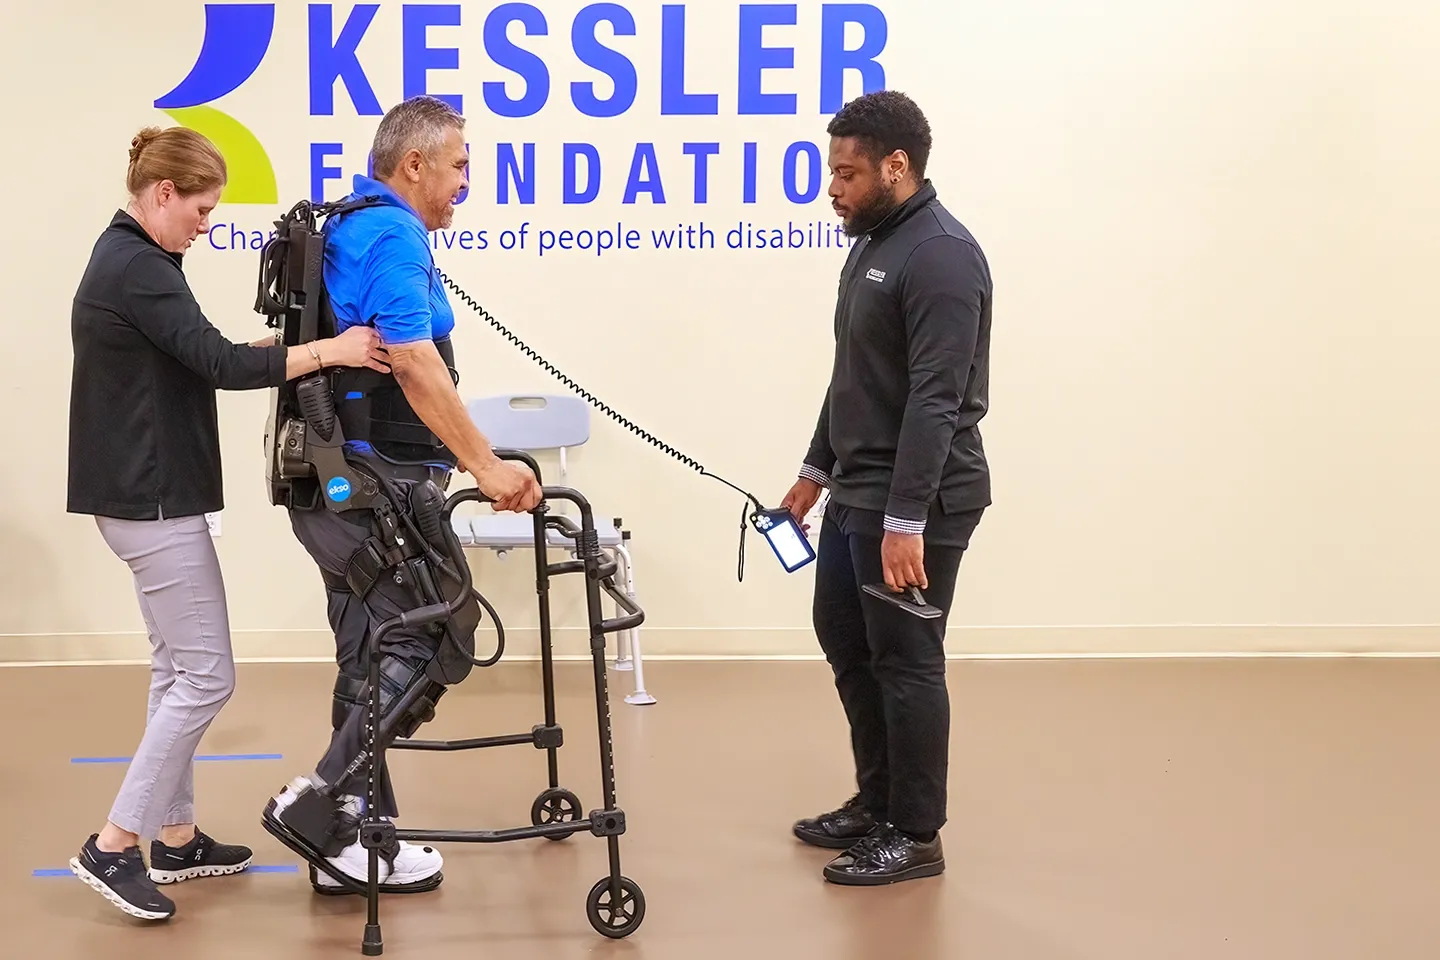 Christina Dandola, PhD, physical therapist at the Center for Mobility and Rehabilitation Engineering Research steadies a male stroke patient exercising in an EksoGT exoskeleton from behind, with Corey Greene, research assistant, looking on in front.